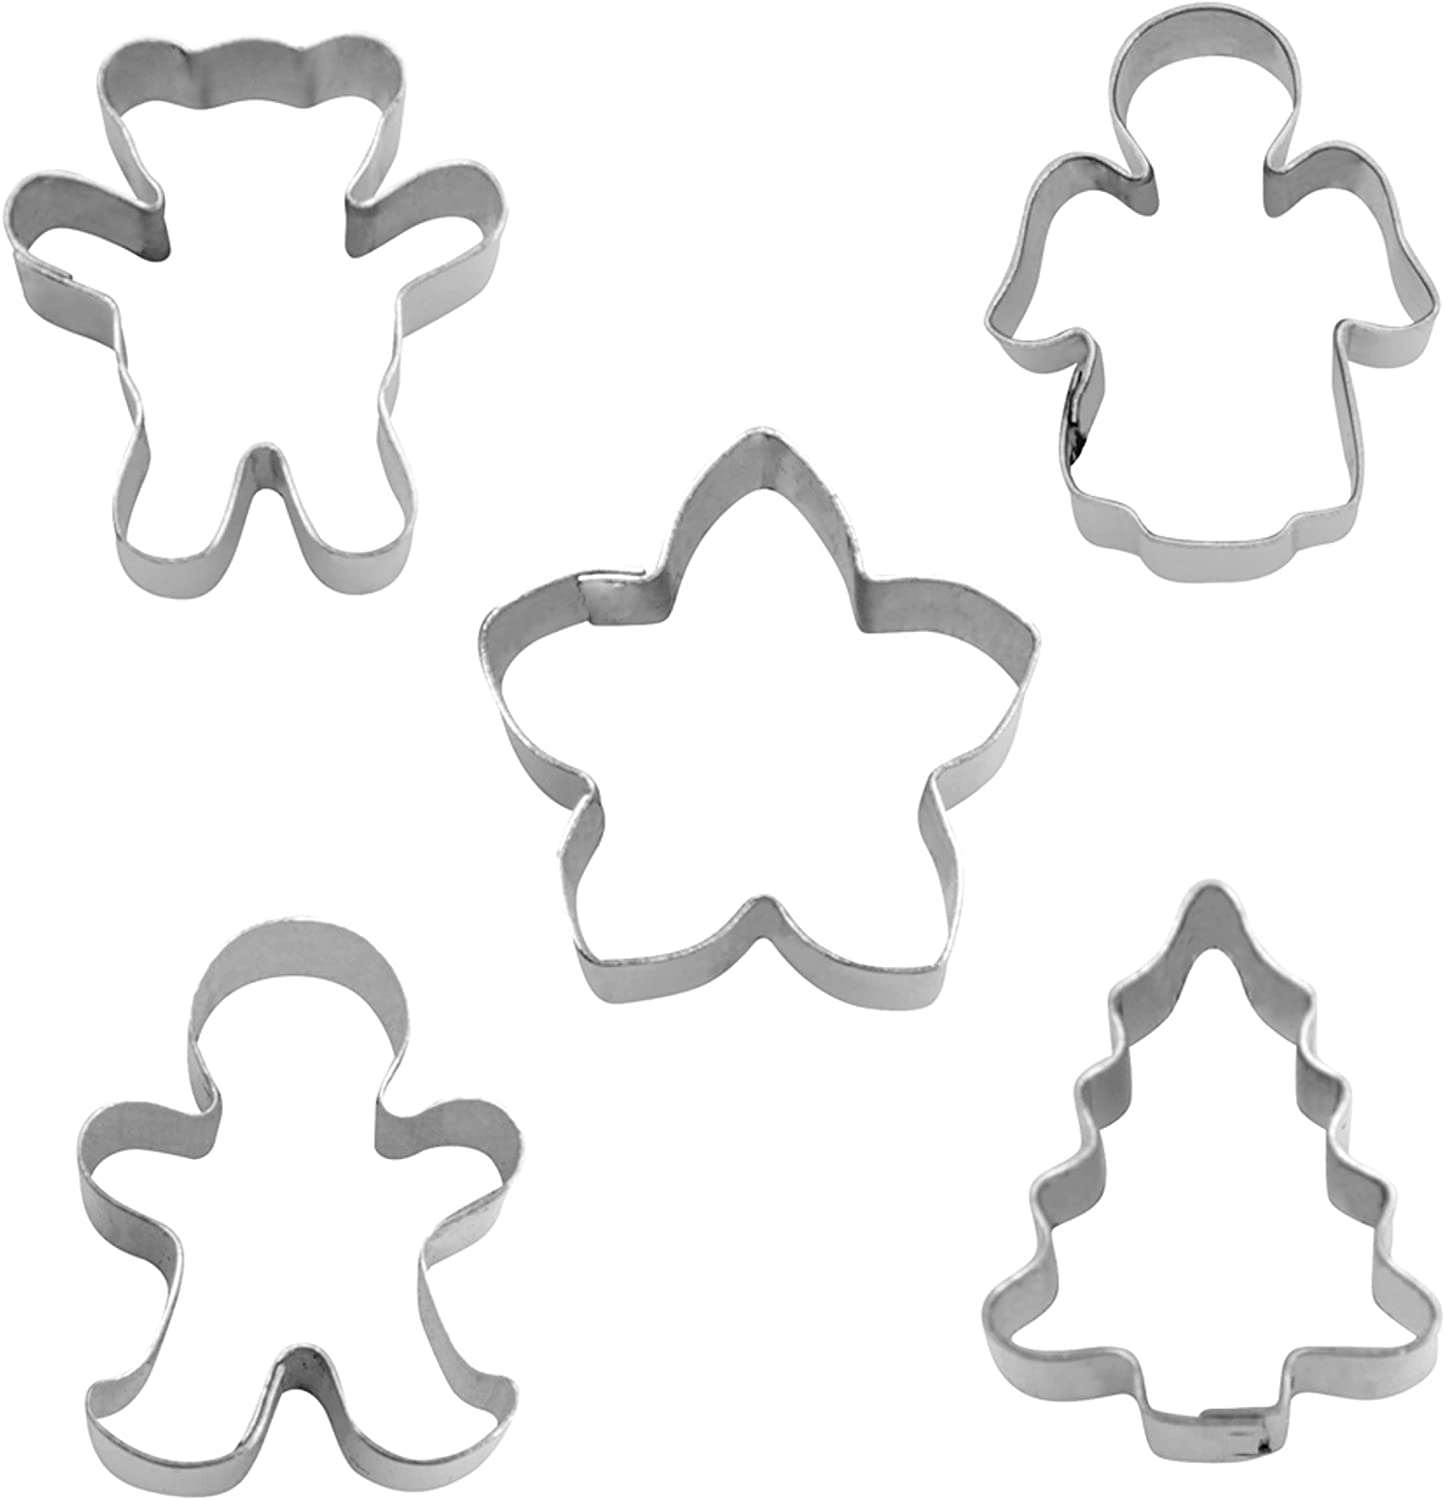 Staedter Städter 004603 Christmas Cookie Cutter – Mini – Set of Cookie Cutters, Stainless Steel, Silver